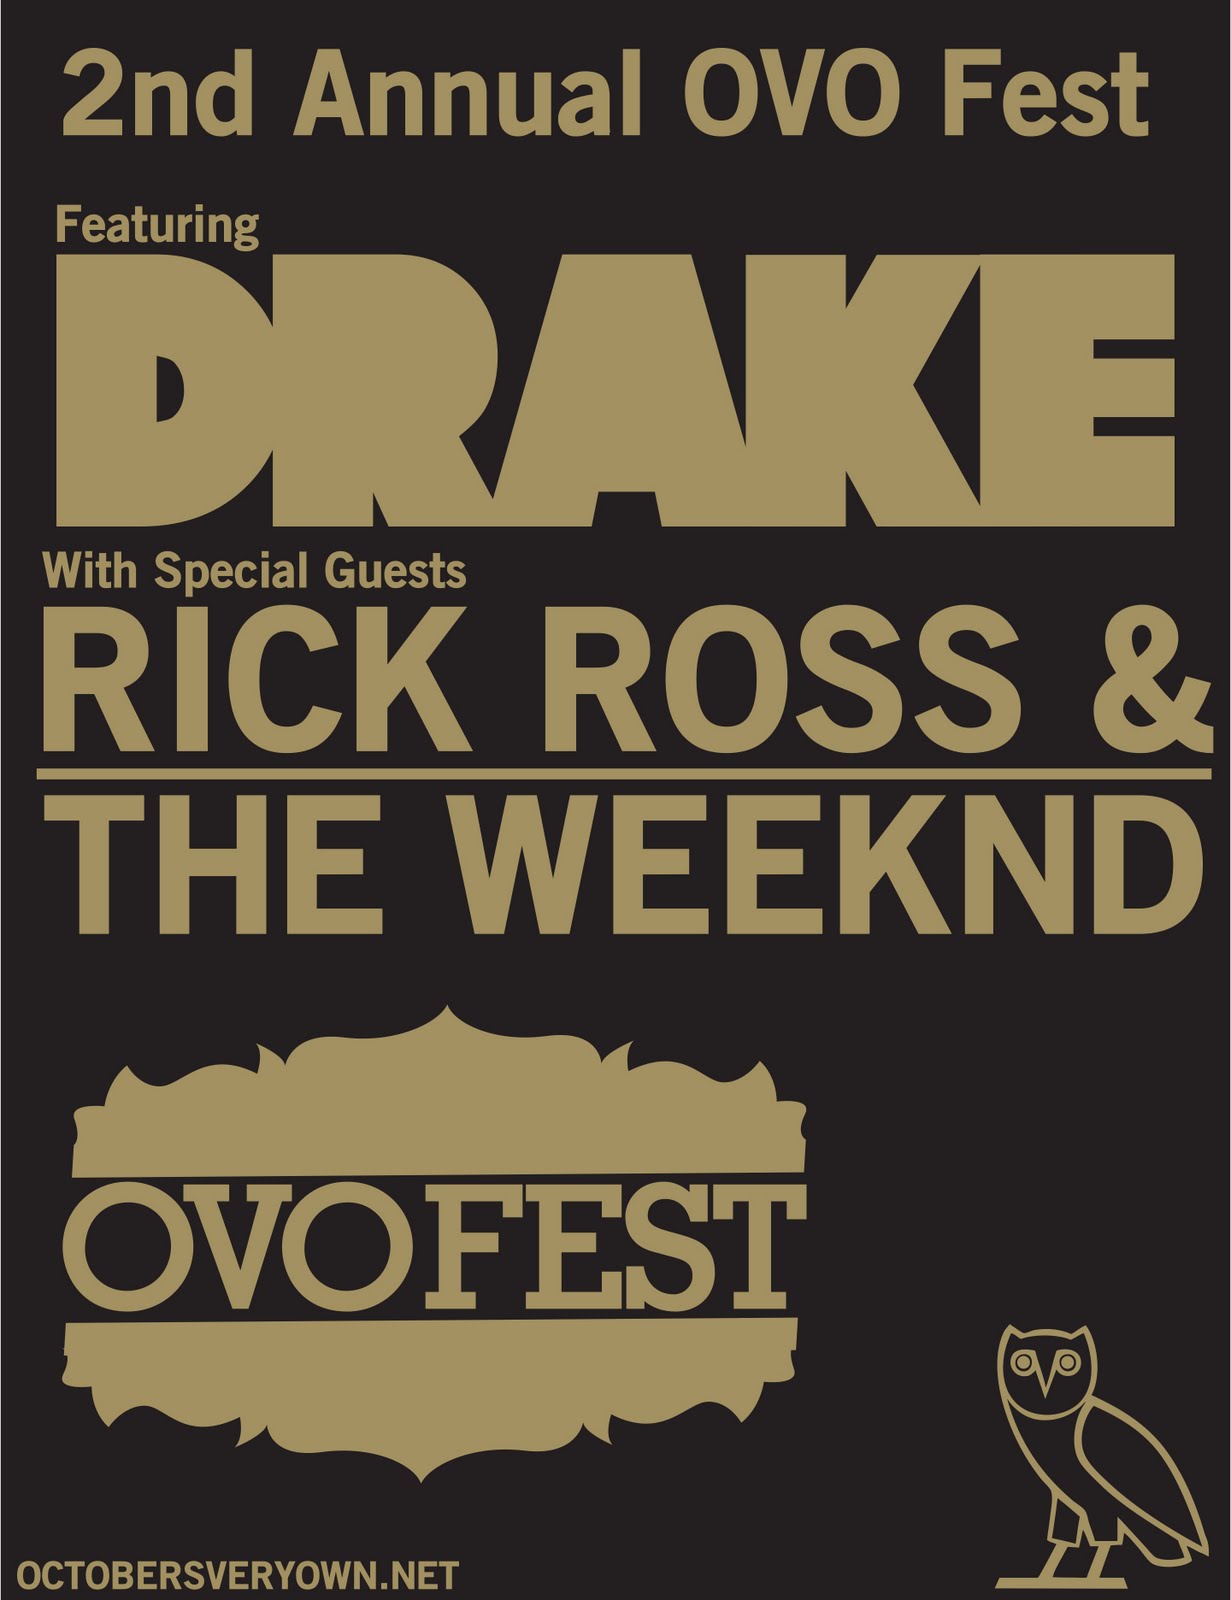 OCTOBERS VERY OWN 2nd Annual OVO FEST Tickets Available Today